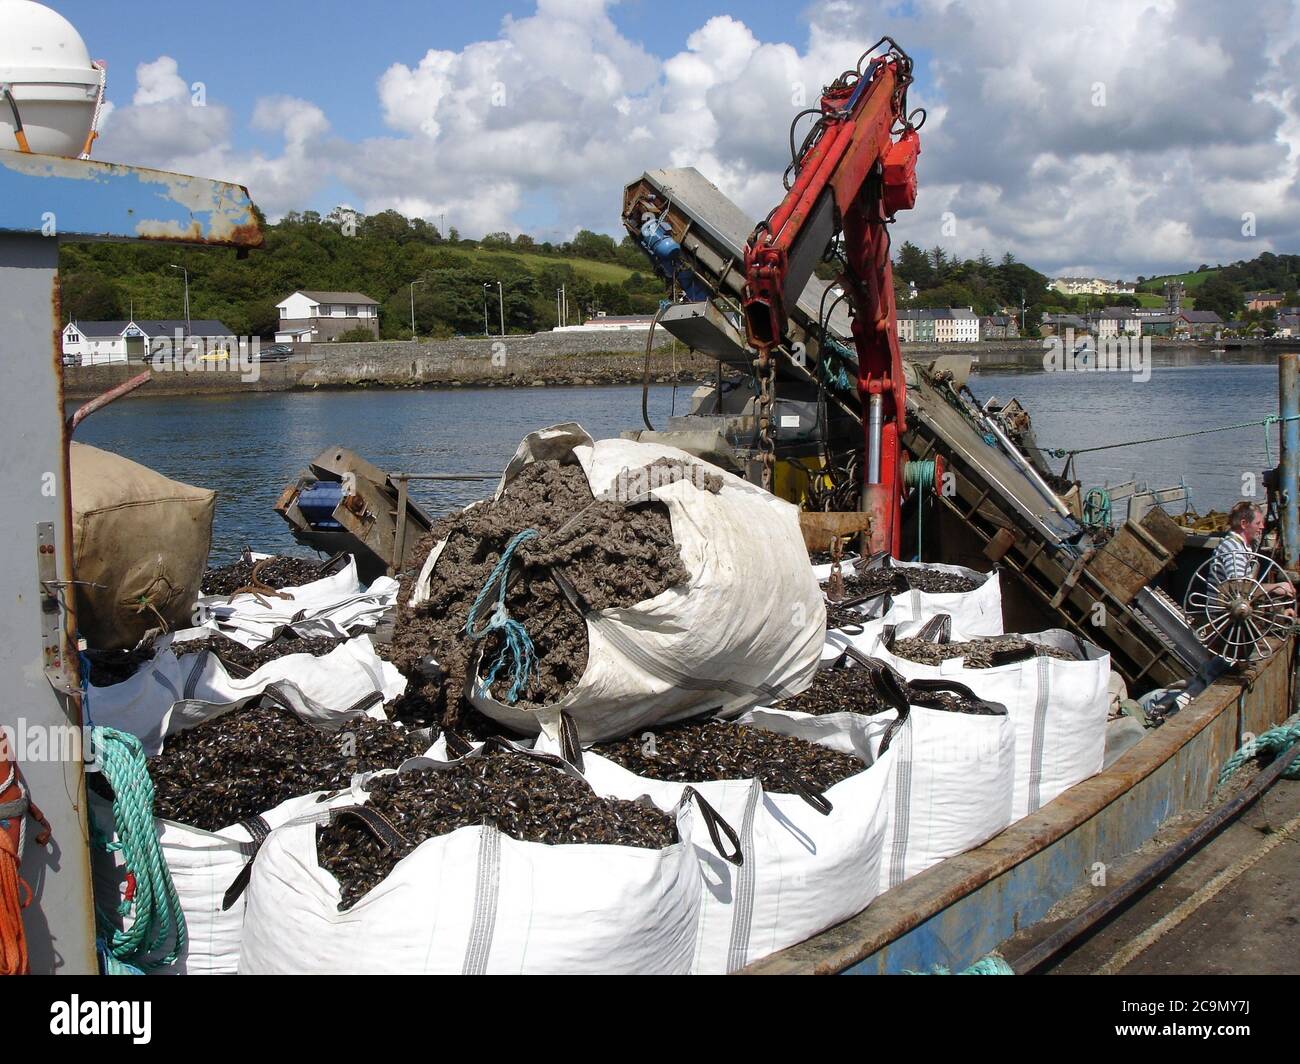 Harvesting mussels grown in the pollution free waters of Bantry Bay, Irelland Stock Photo